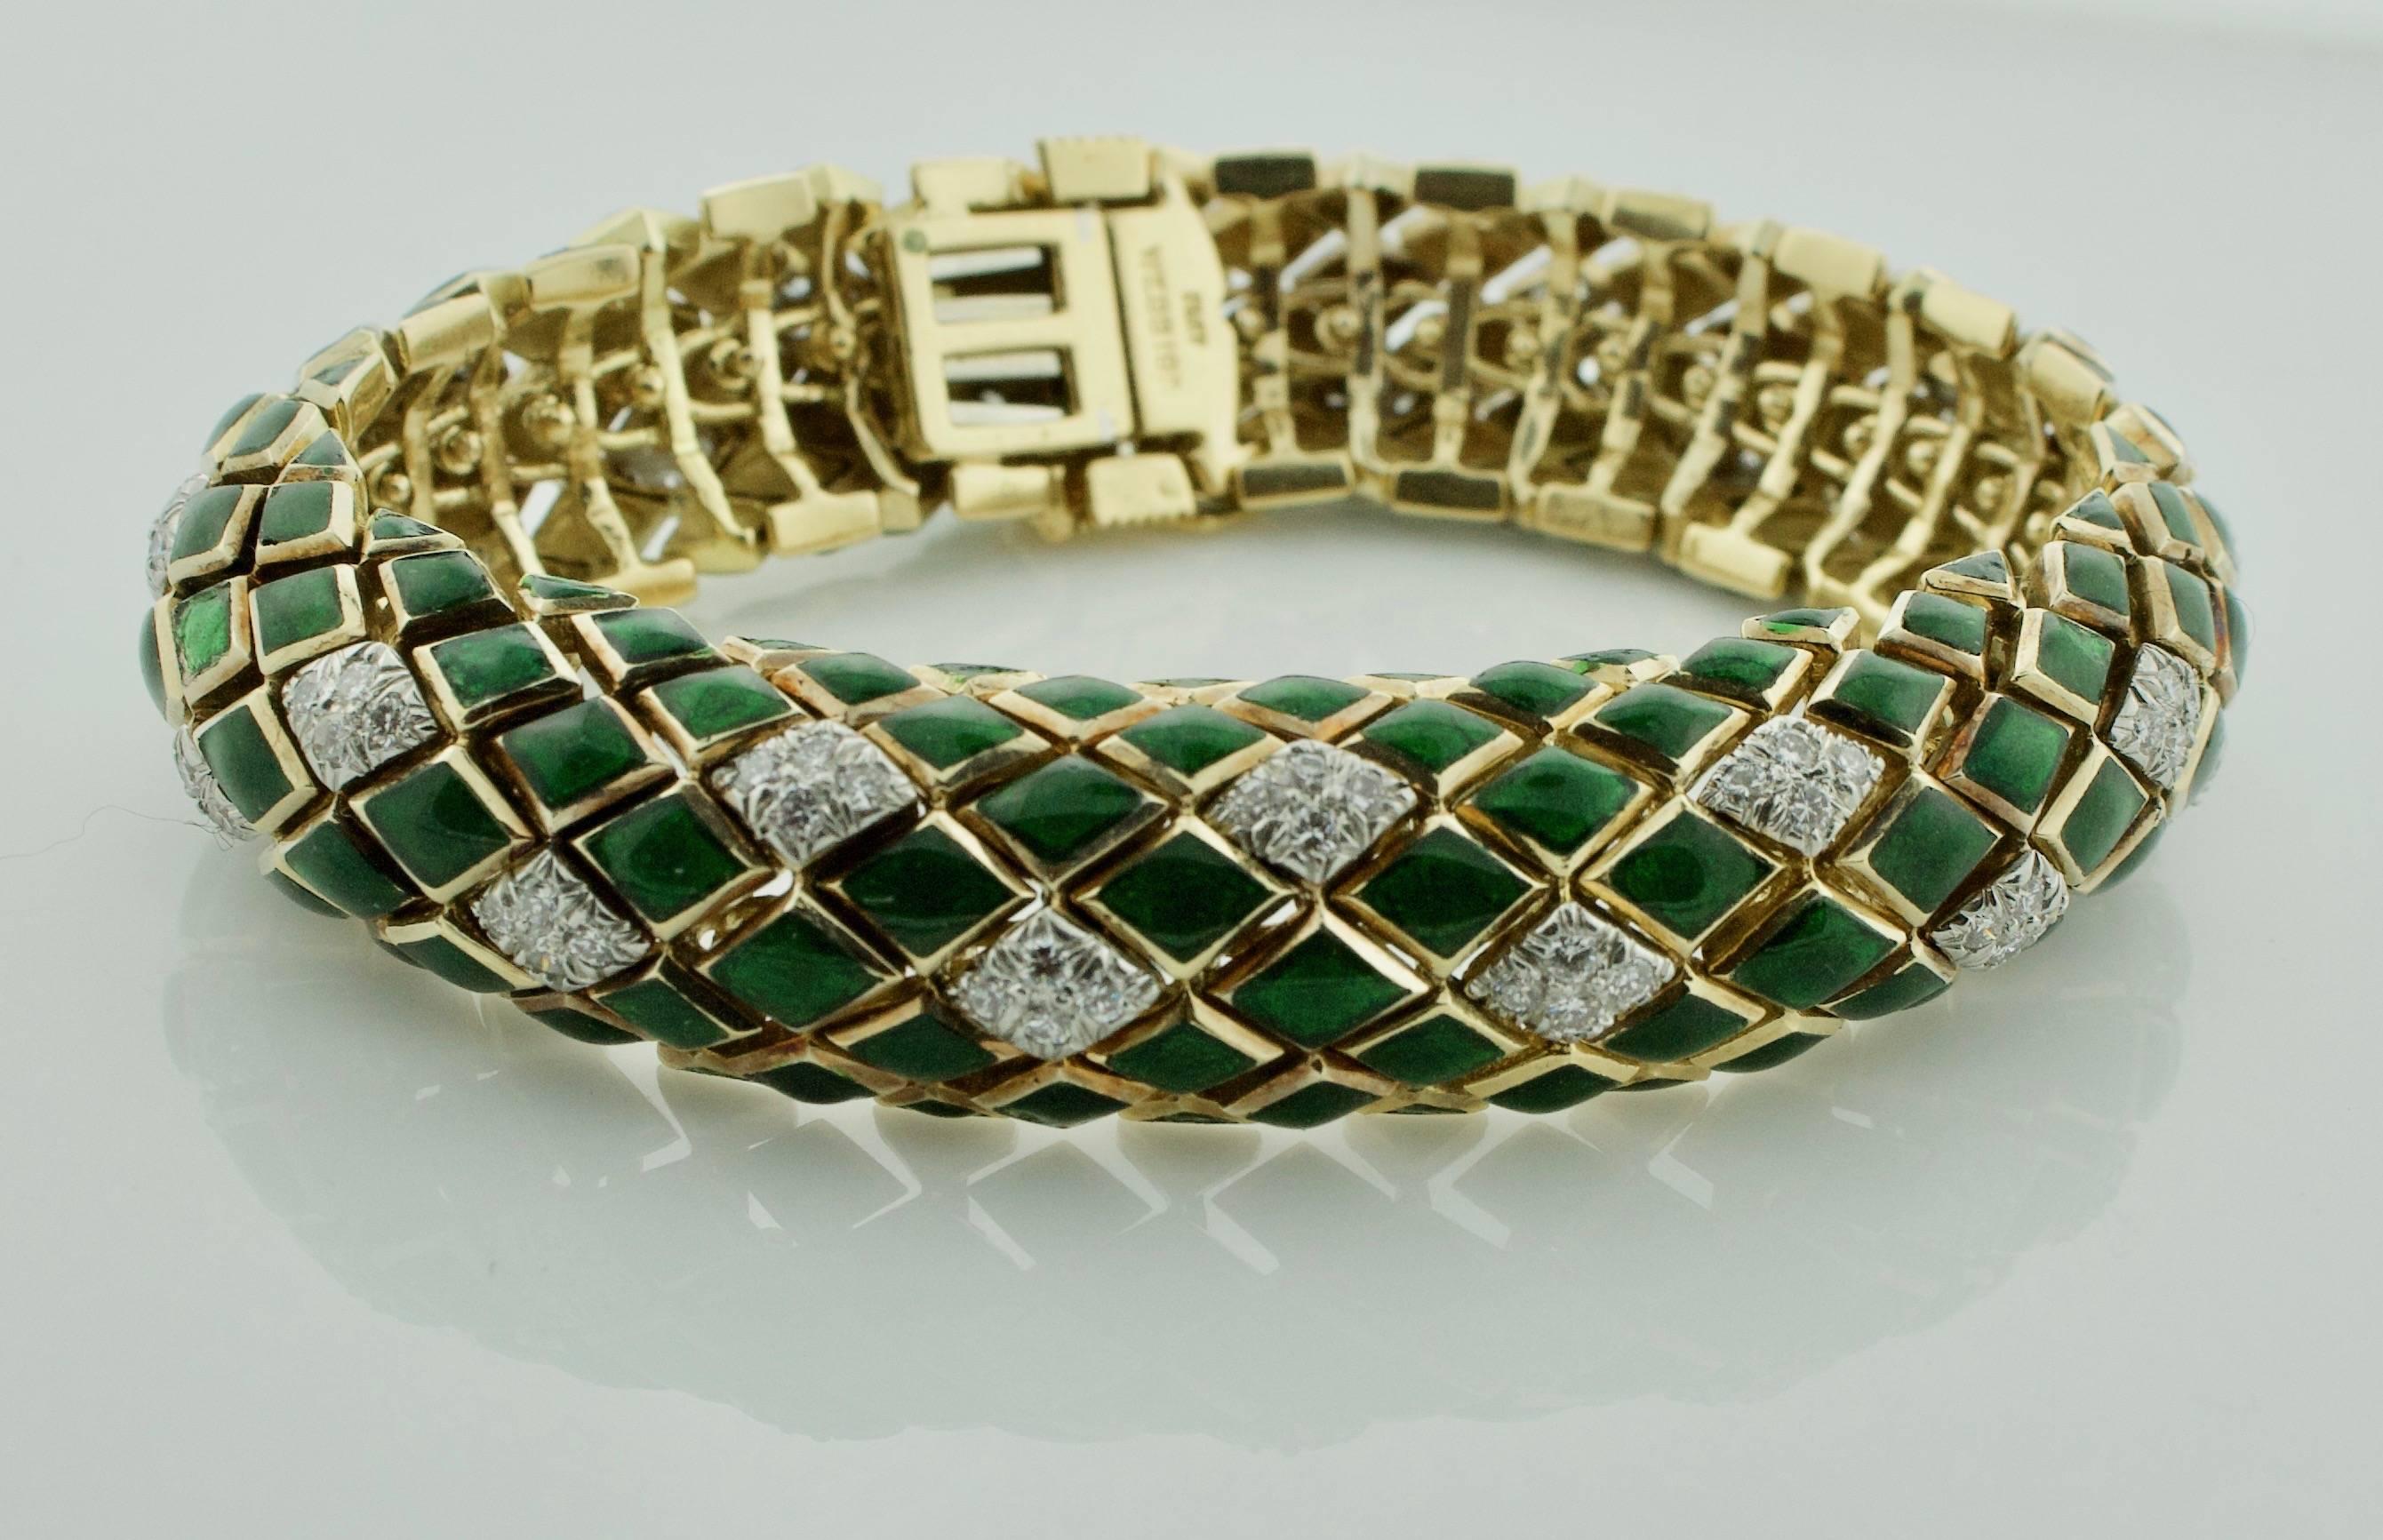 David Webb Green Enamel and Diamond Bracelet in 18k and Platinum  
Ninety Six Round Brilliant Cut Diamonds weighing 3.00 carats approximately
Unlike me its Flexible
David Webb is One Of the Finest Jewelers in The World.  Just Ask Them
7 3/4 inches